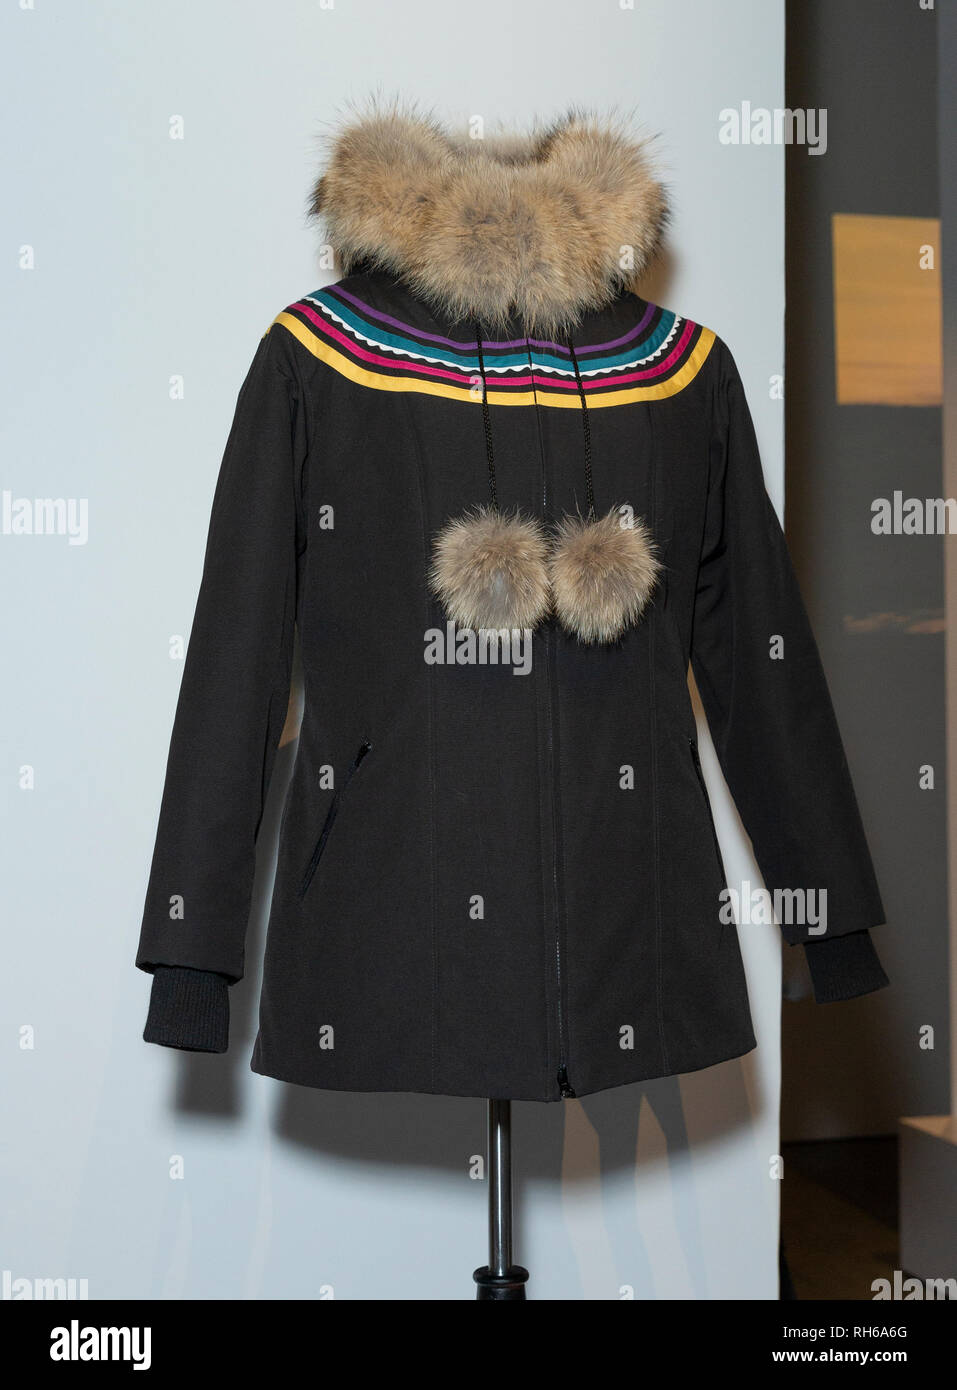 New York, NY - January 31, 2019: Parka made by Inuit seamstress on display during Canada Goose Celebrates the Launch of Project Atigi at Studio 525 Credit: lev radin/Alamy Live News Stock Photo